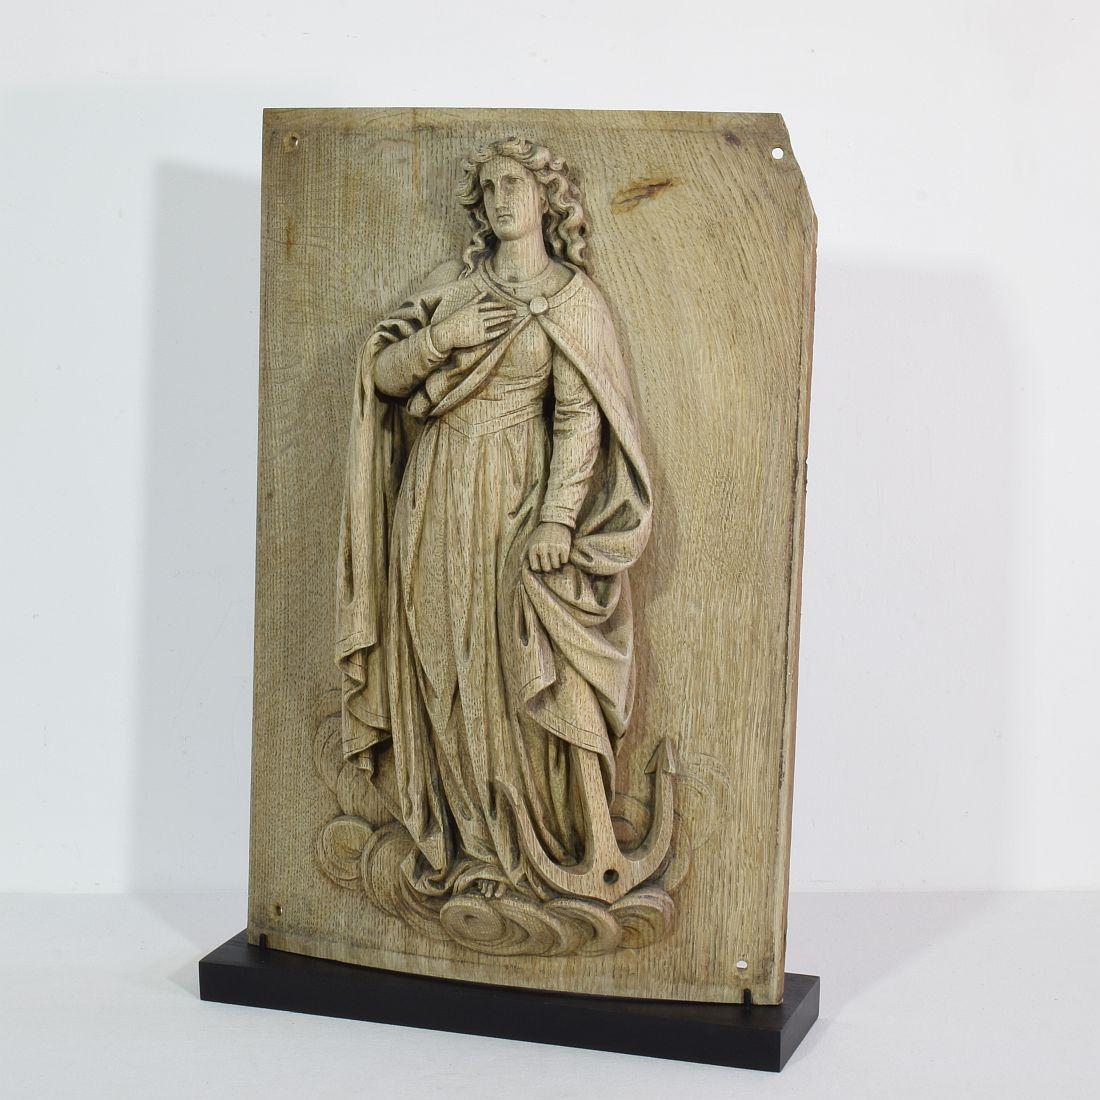 Beautiful weathered oak panel representing Saint Philomena.

Also known as Philomena of Rome was a young virgin martyr whose remains were discovered on May 24–25, 1802, in the Catacomb of Priscilla. Three tiles enclosing the tomb bore an